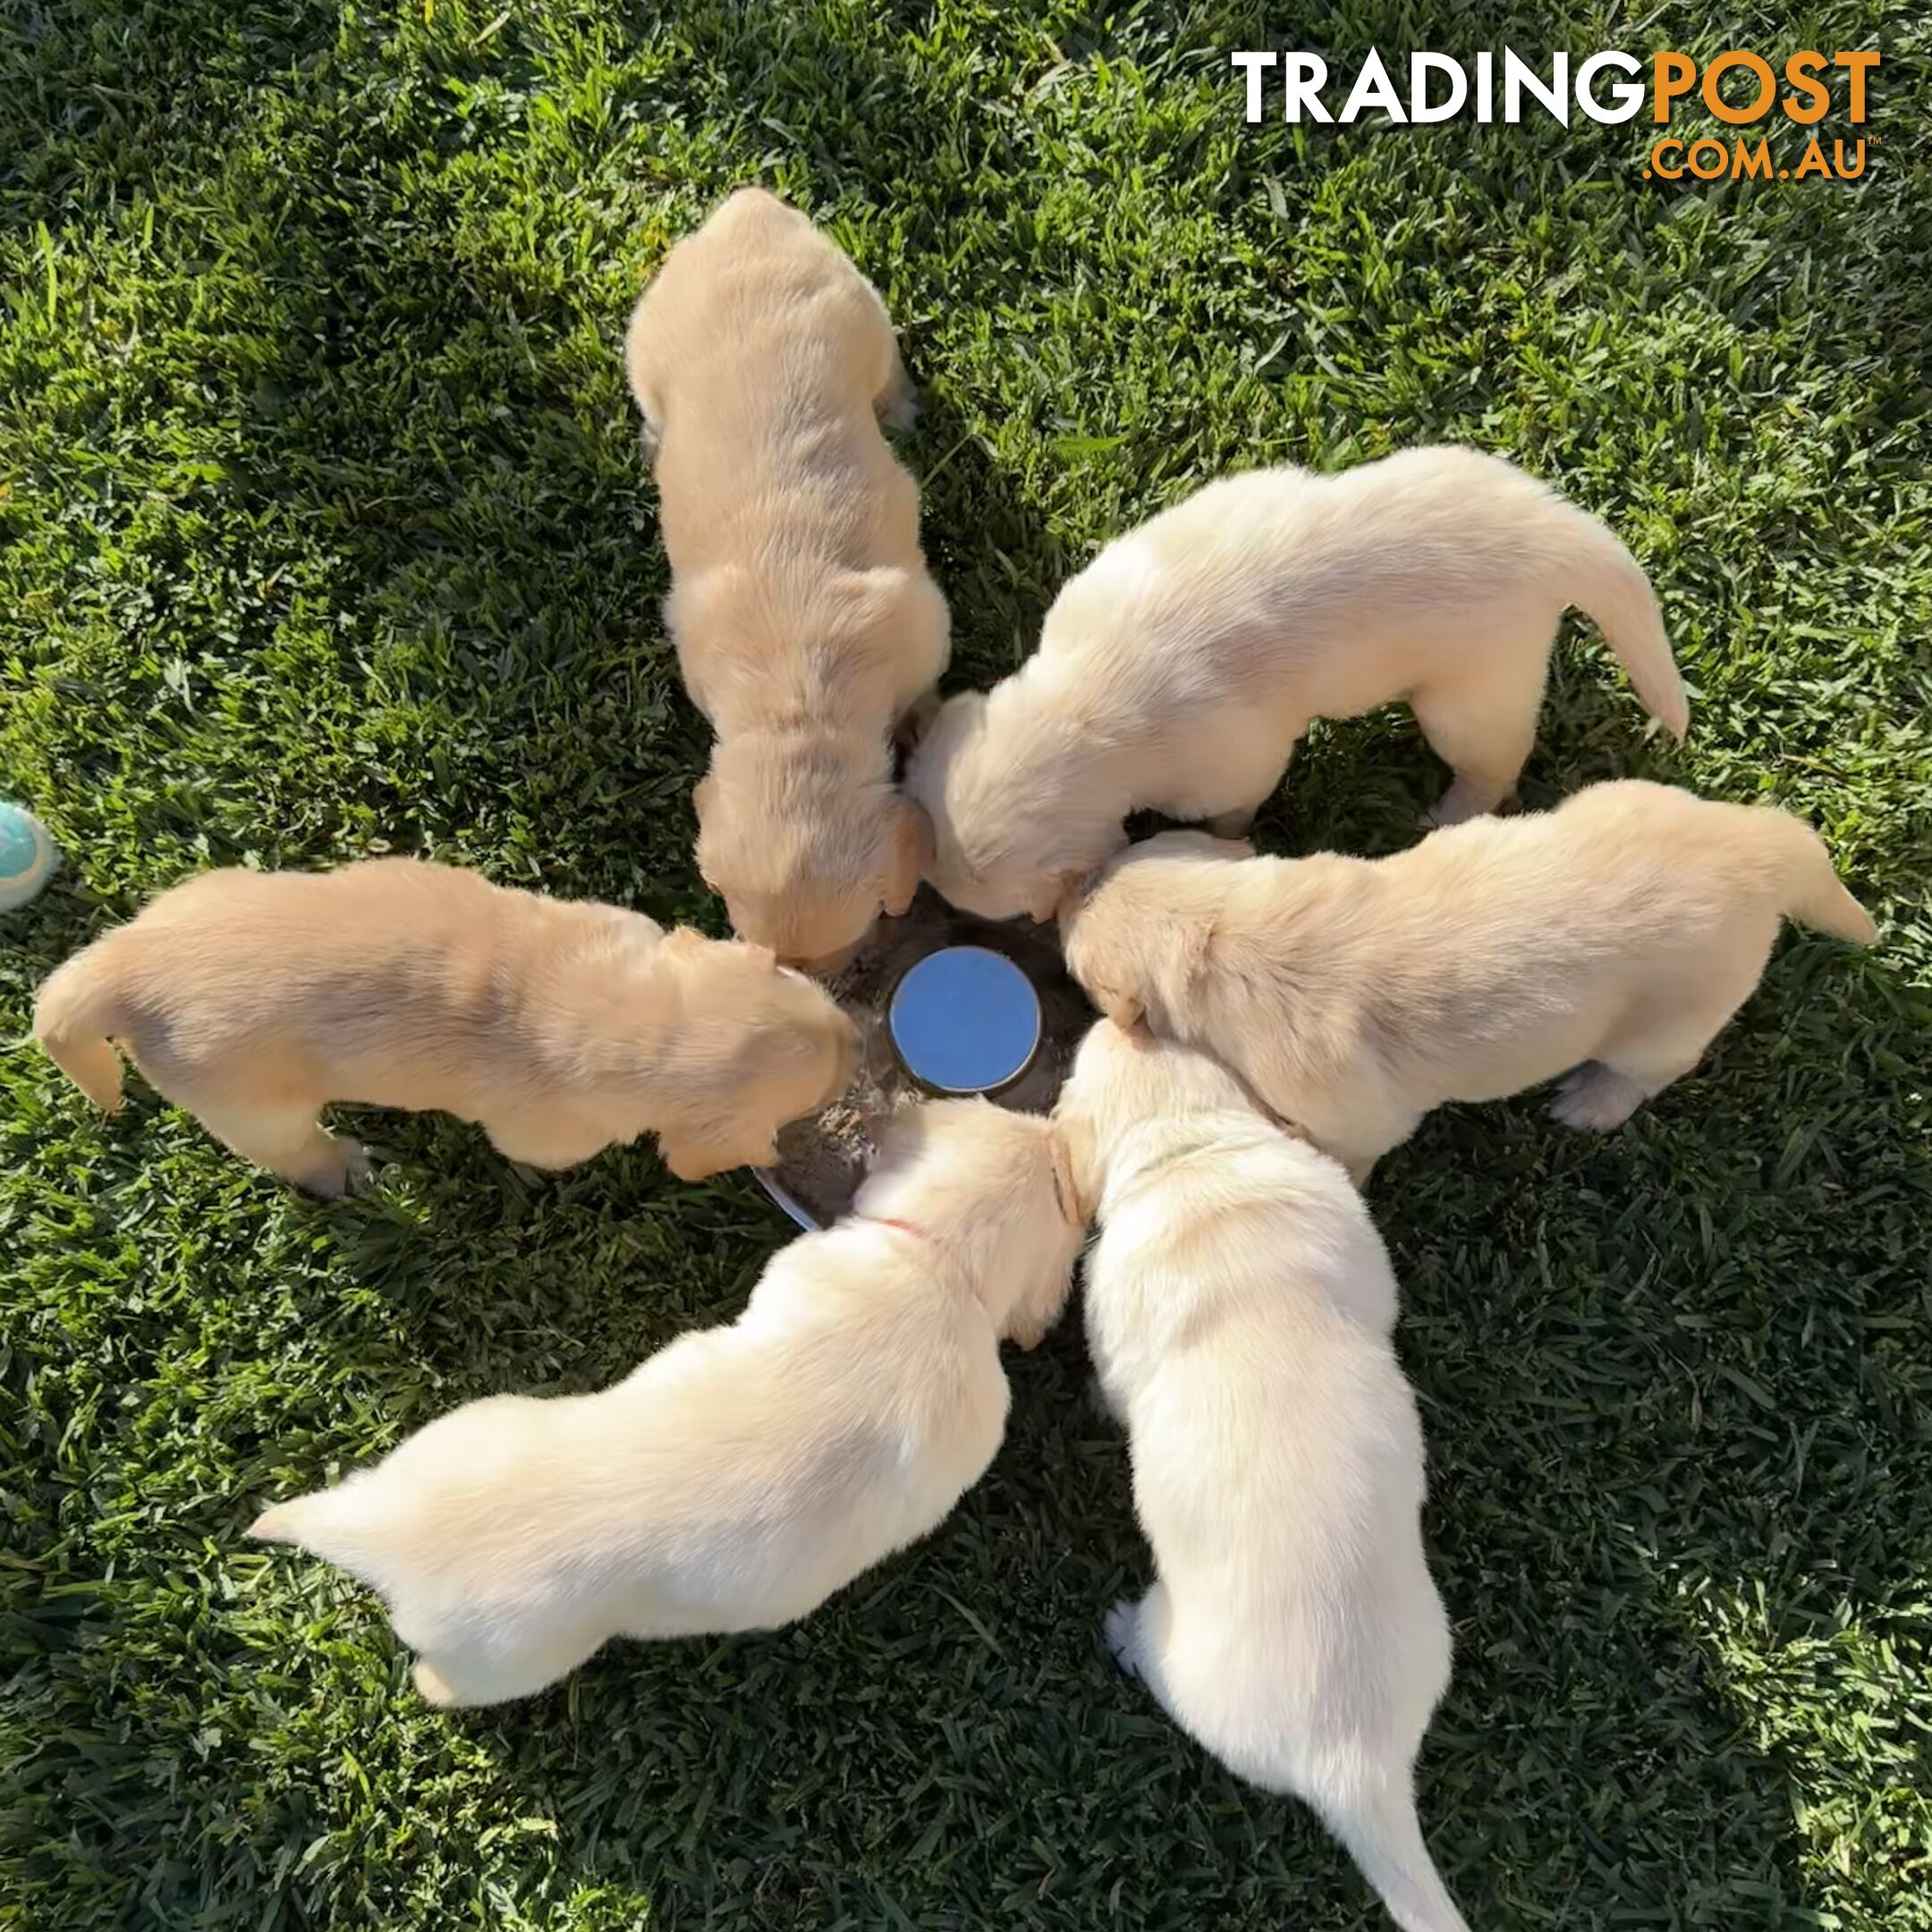 Purebred Golden Retriever Pups - UPDATE: ONLY 2  STILL AVAILABLE